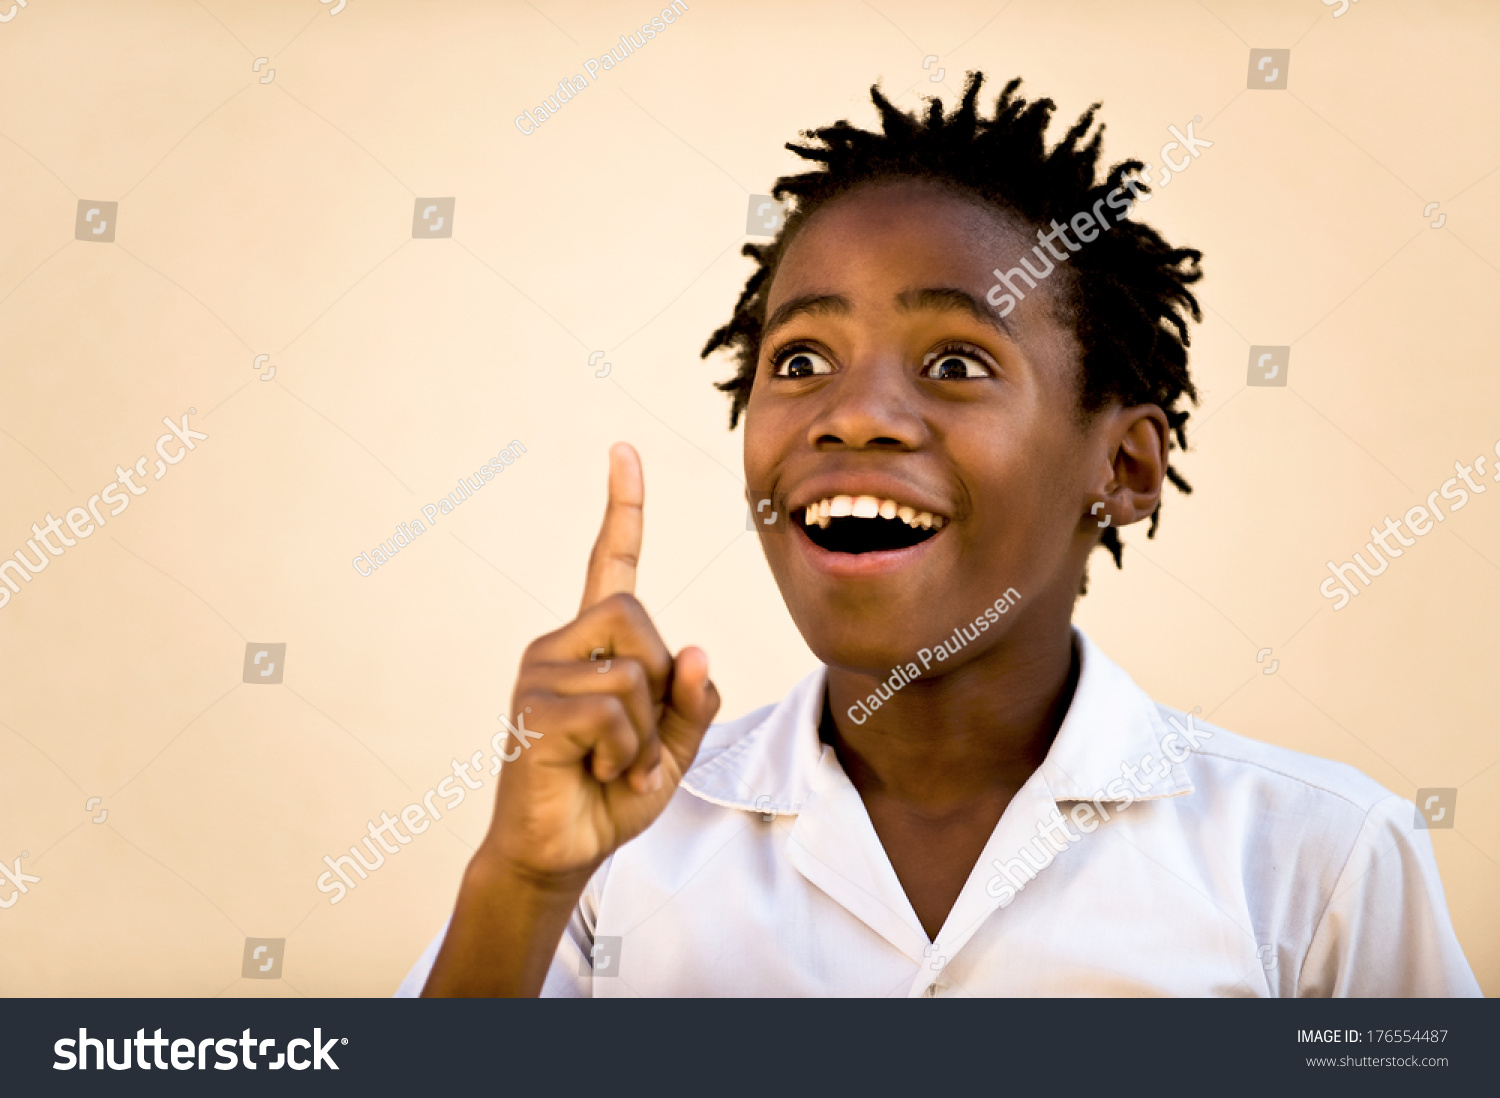 An African boy pointing his finger upwards looking excited. #176554487